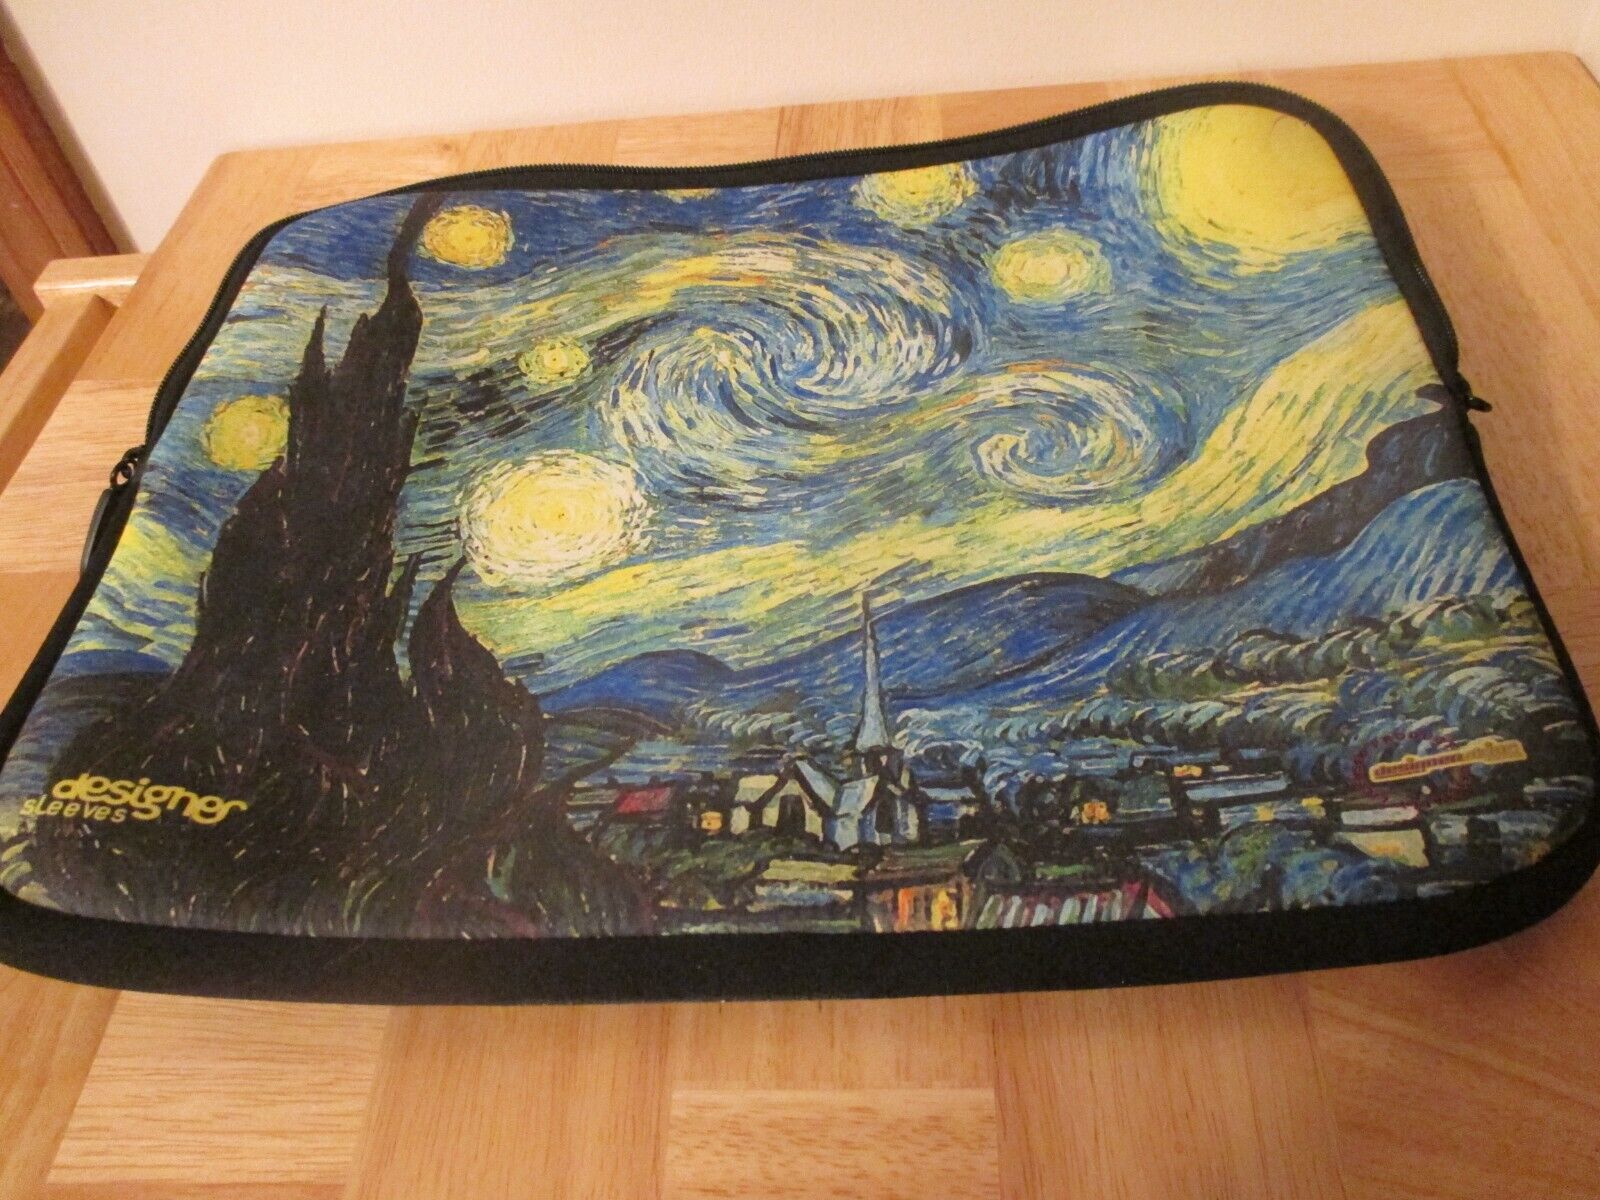 Vincent Van Gogh - Starry Night - Laptop Case/Sleeve/Cover by Designer Sleeves